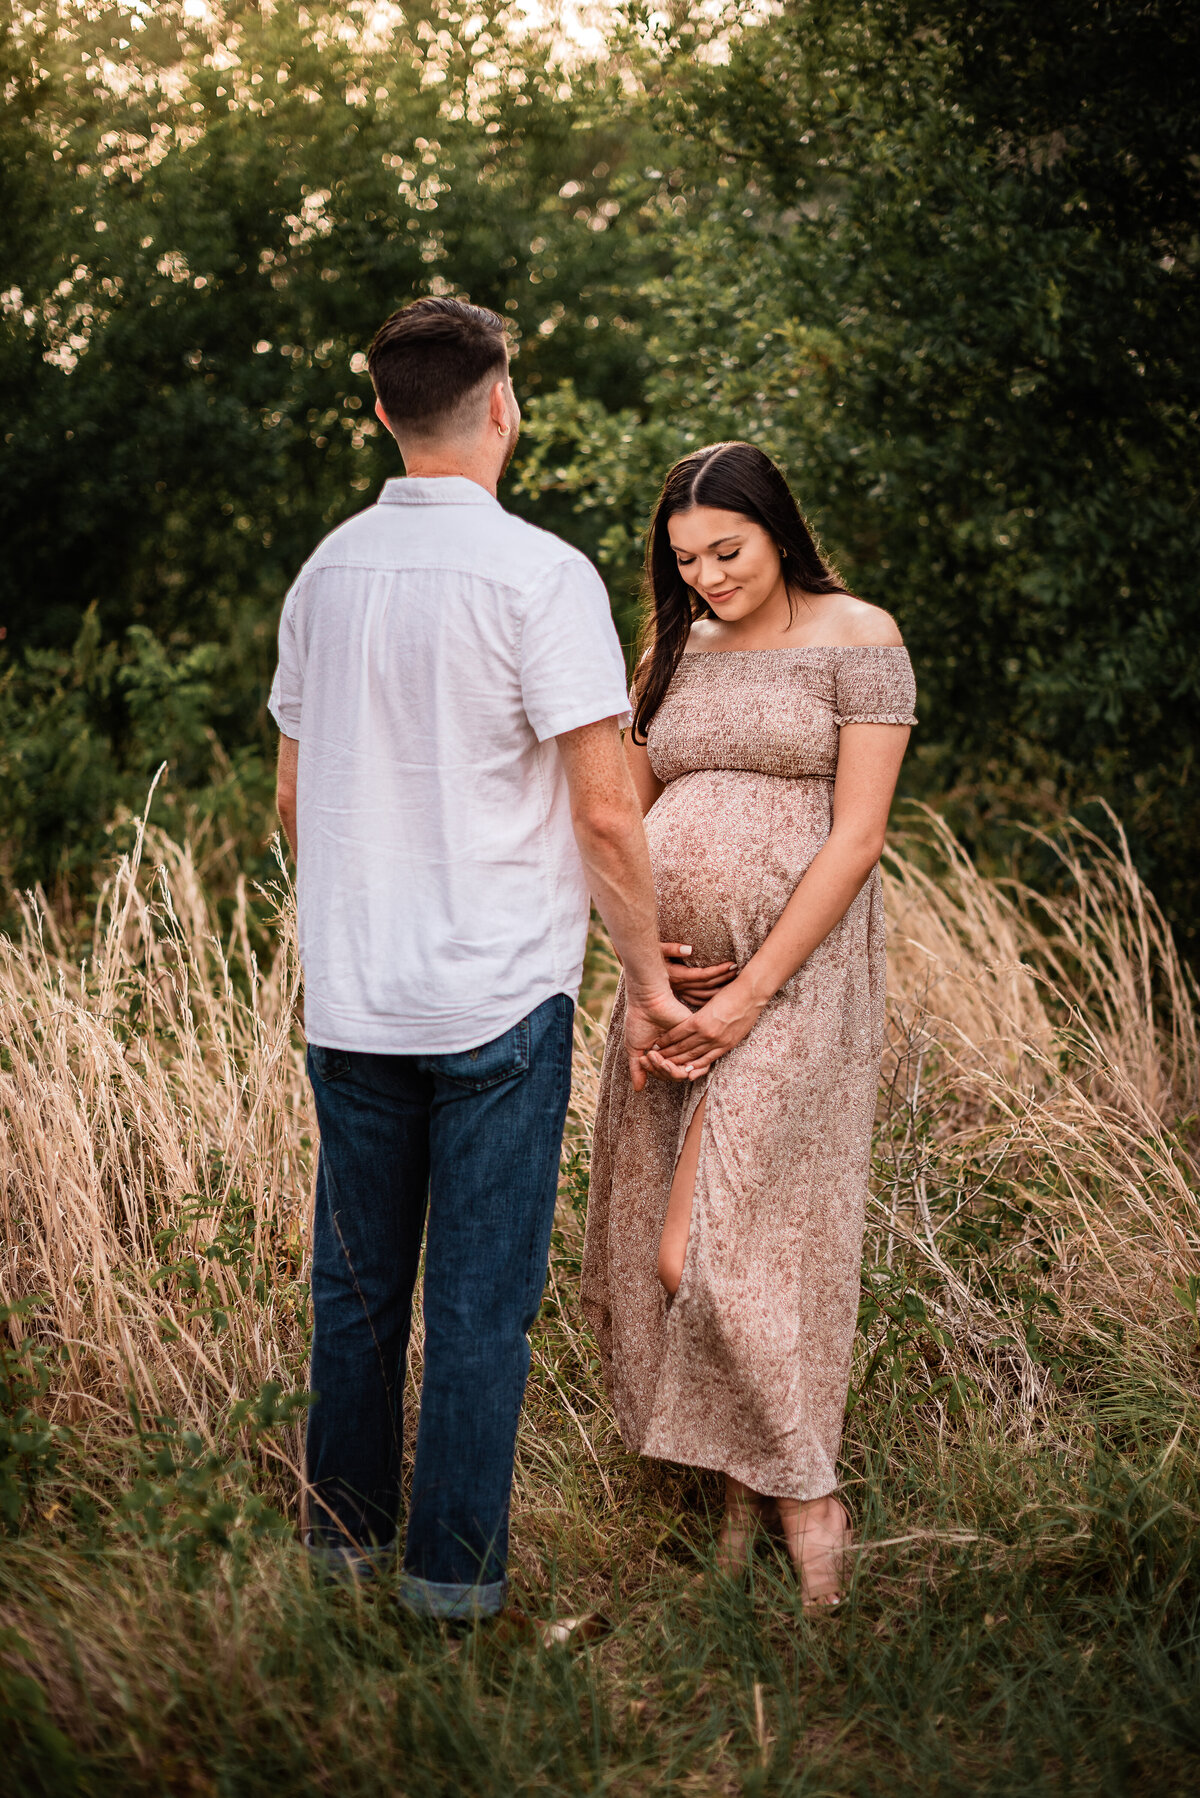 A Houston area mom to be holds her boyfriend's hand and looks at her belly while standing in a field of golden grass.